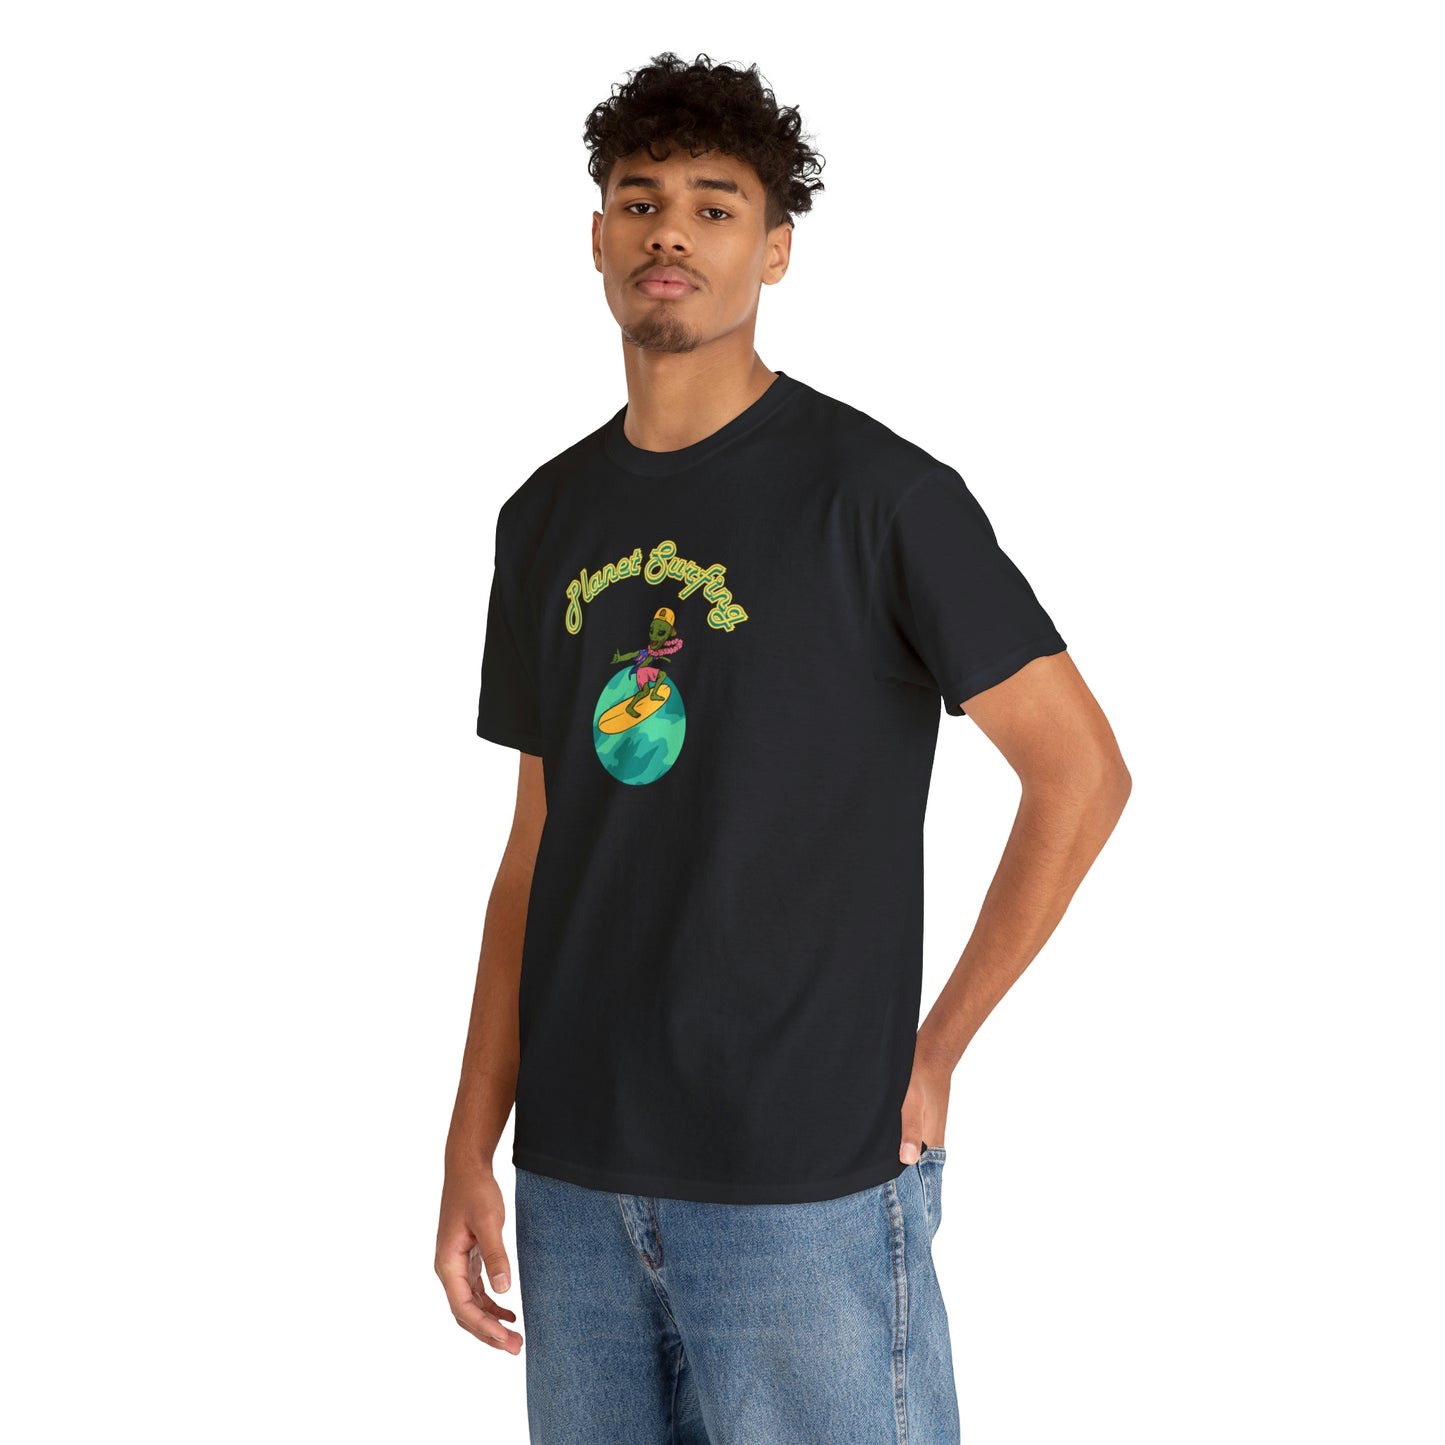 Planet Surfing Tee